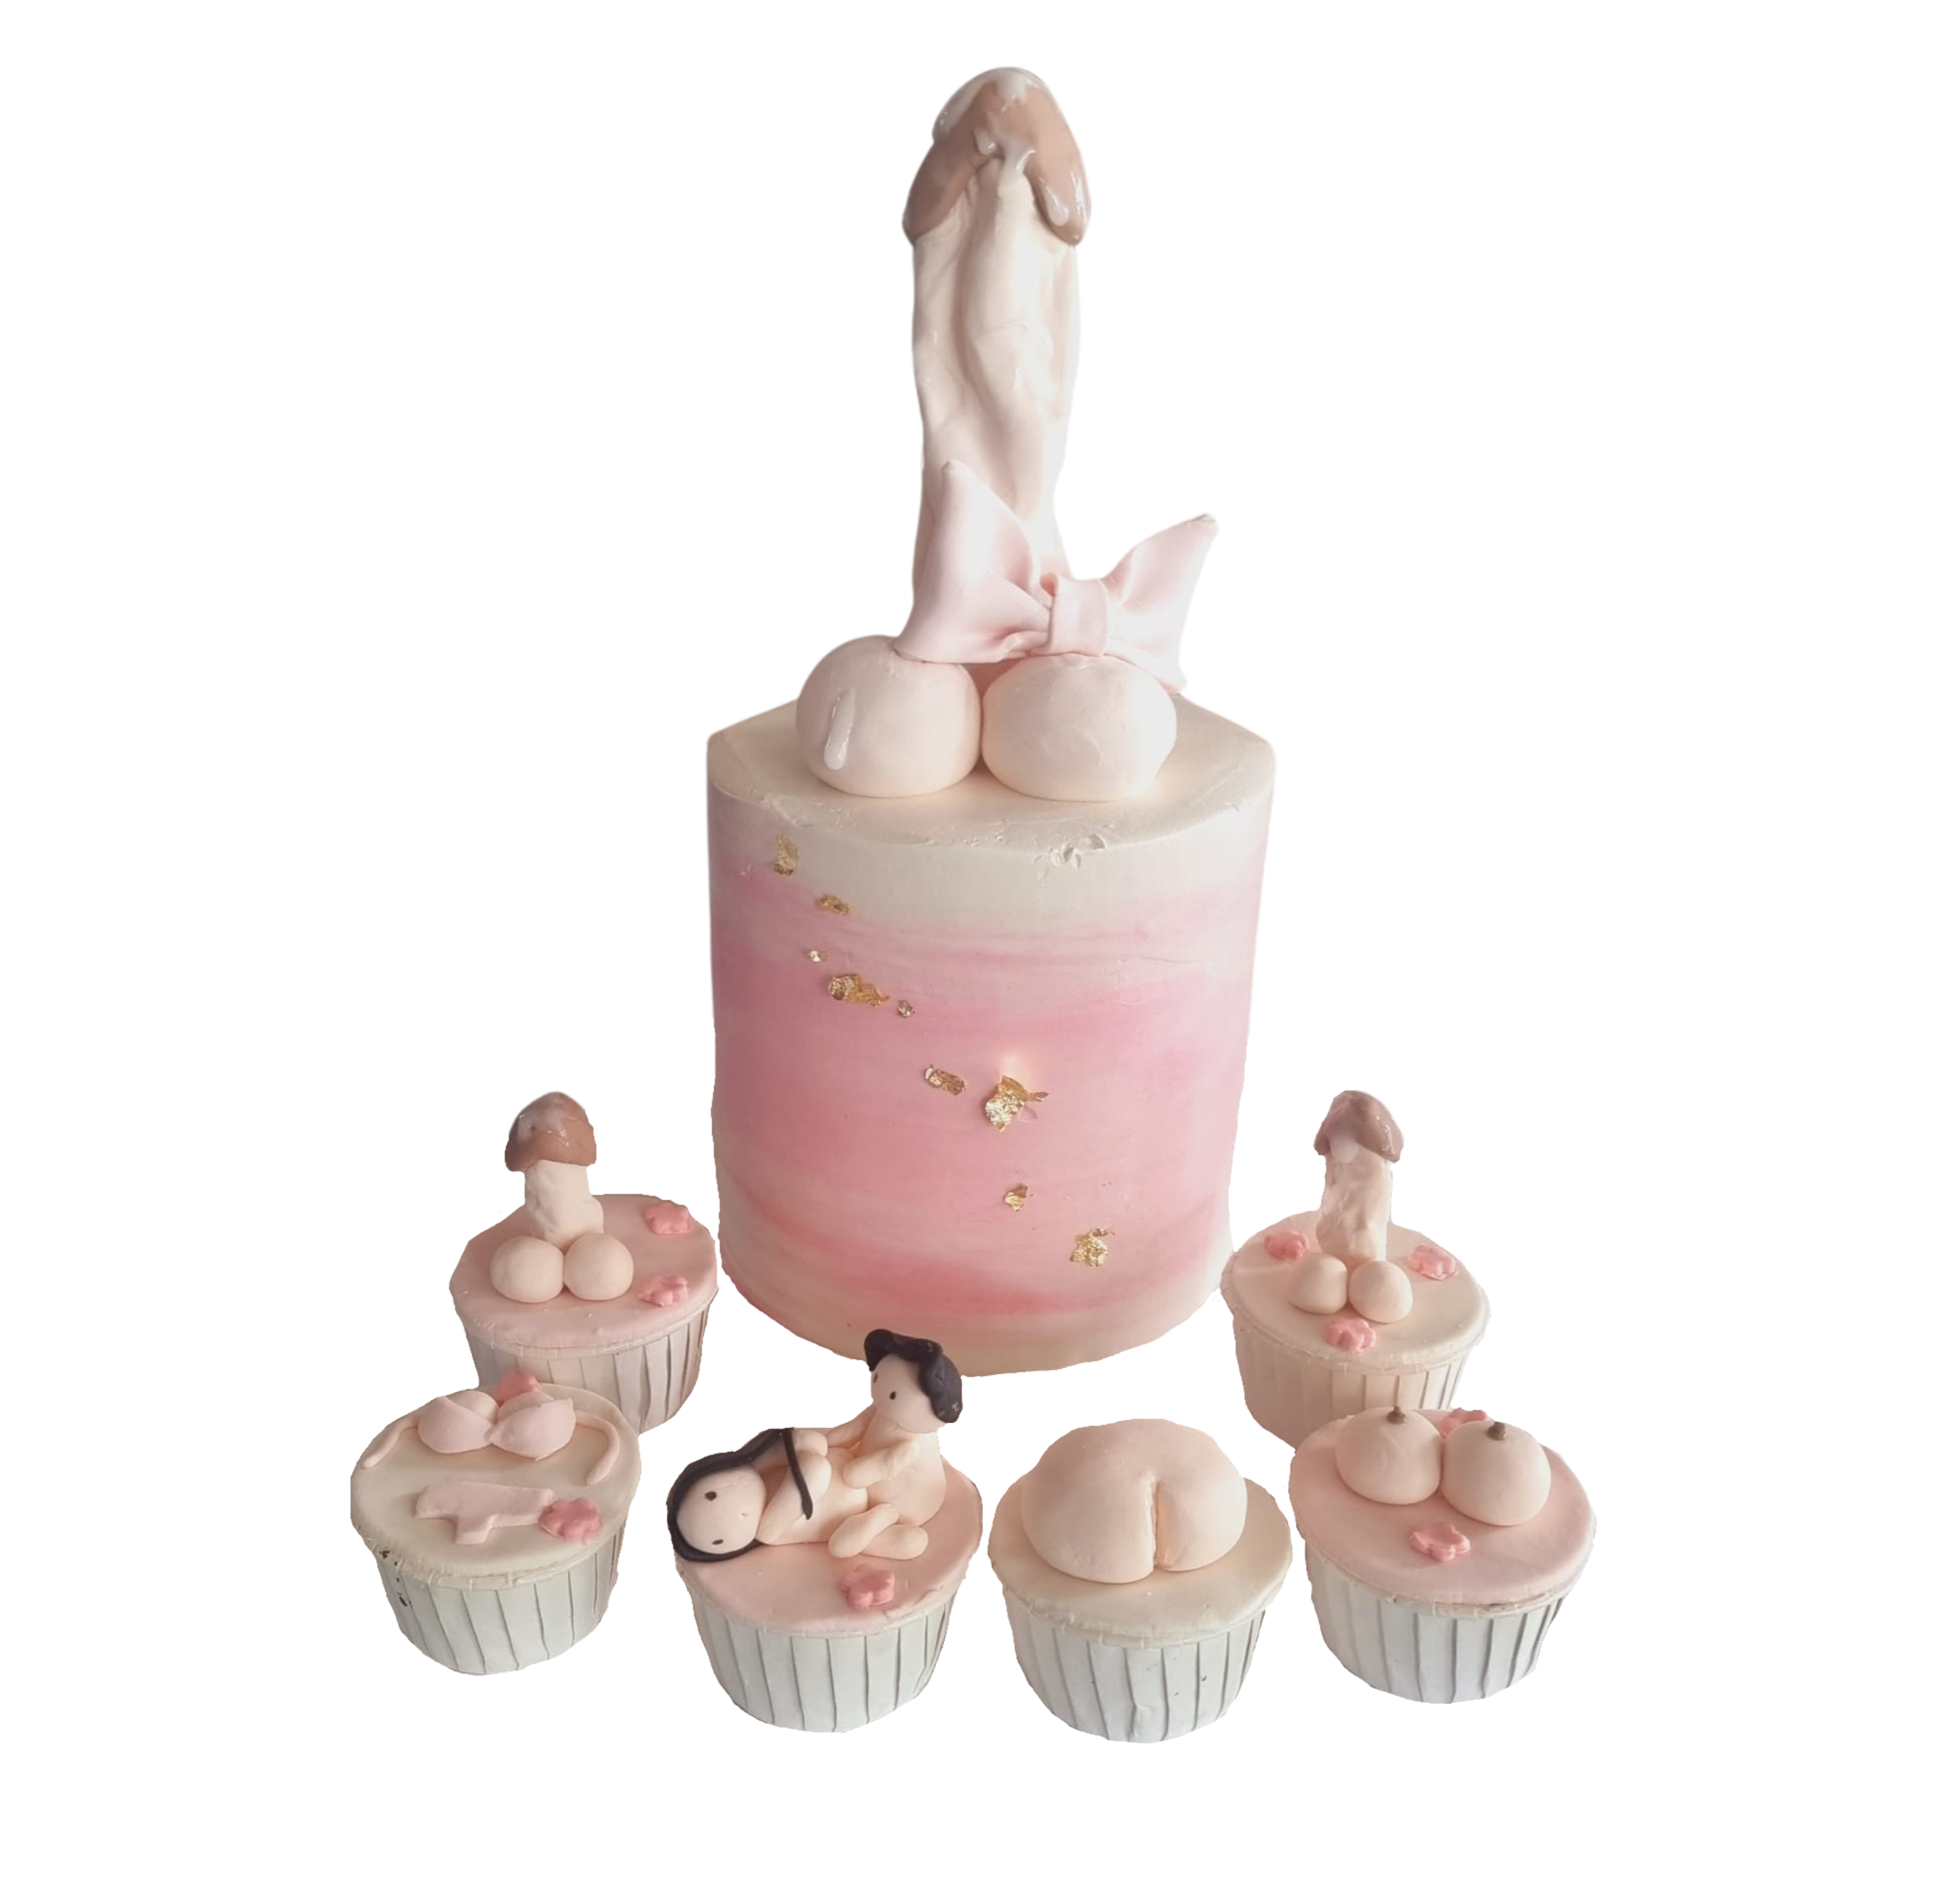 Penis Cake for Hens Night with Cupcakes 2